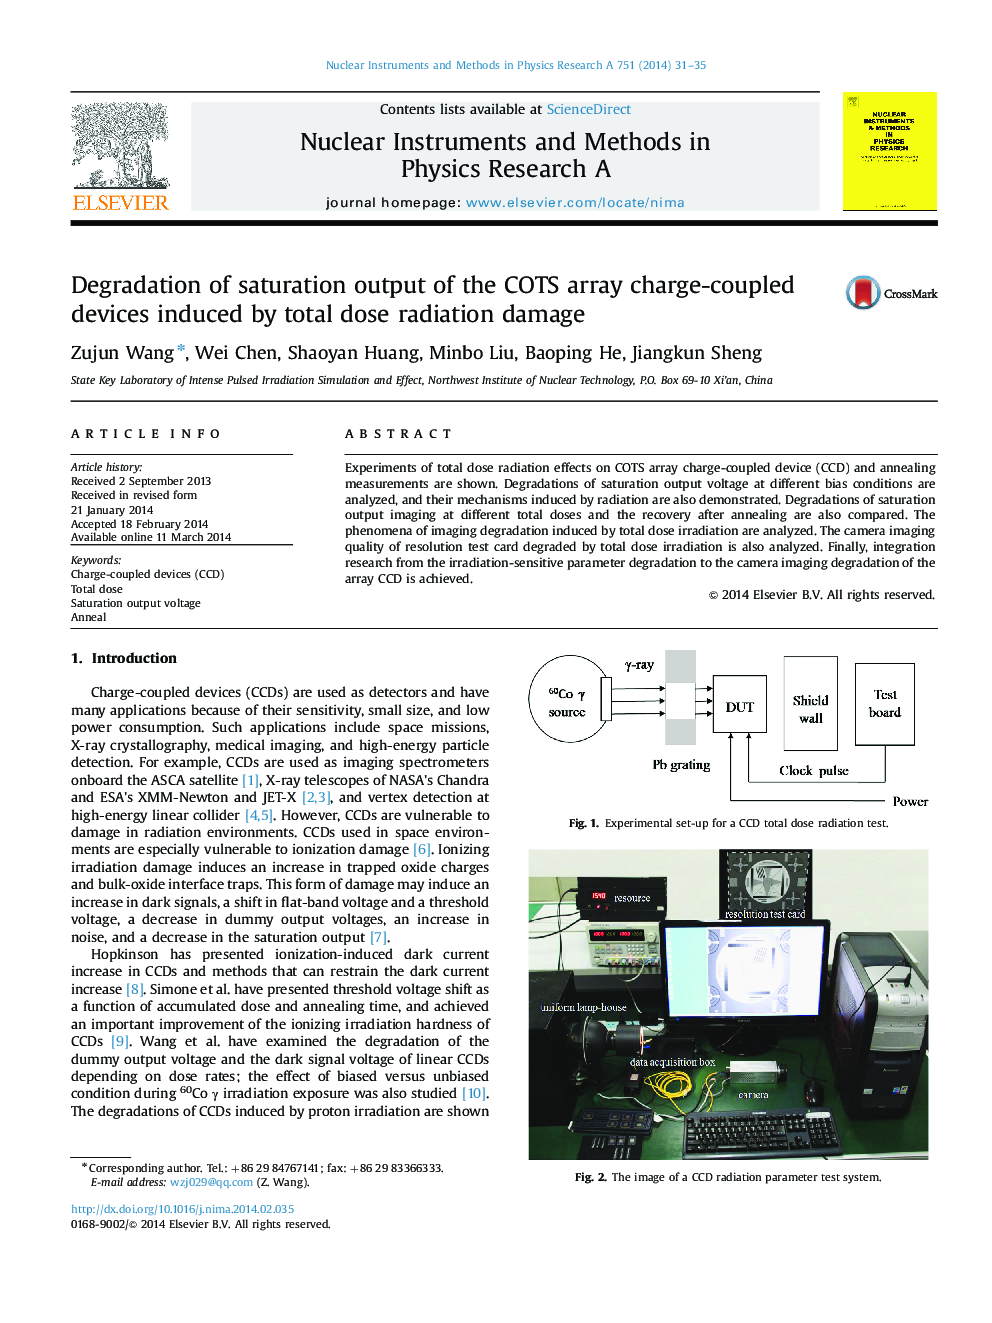 Degradation of saturation output of the COTS array charge-coupled devices induced by total dose radiation damage